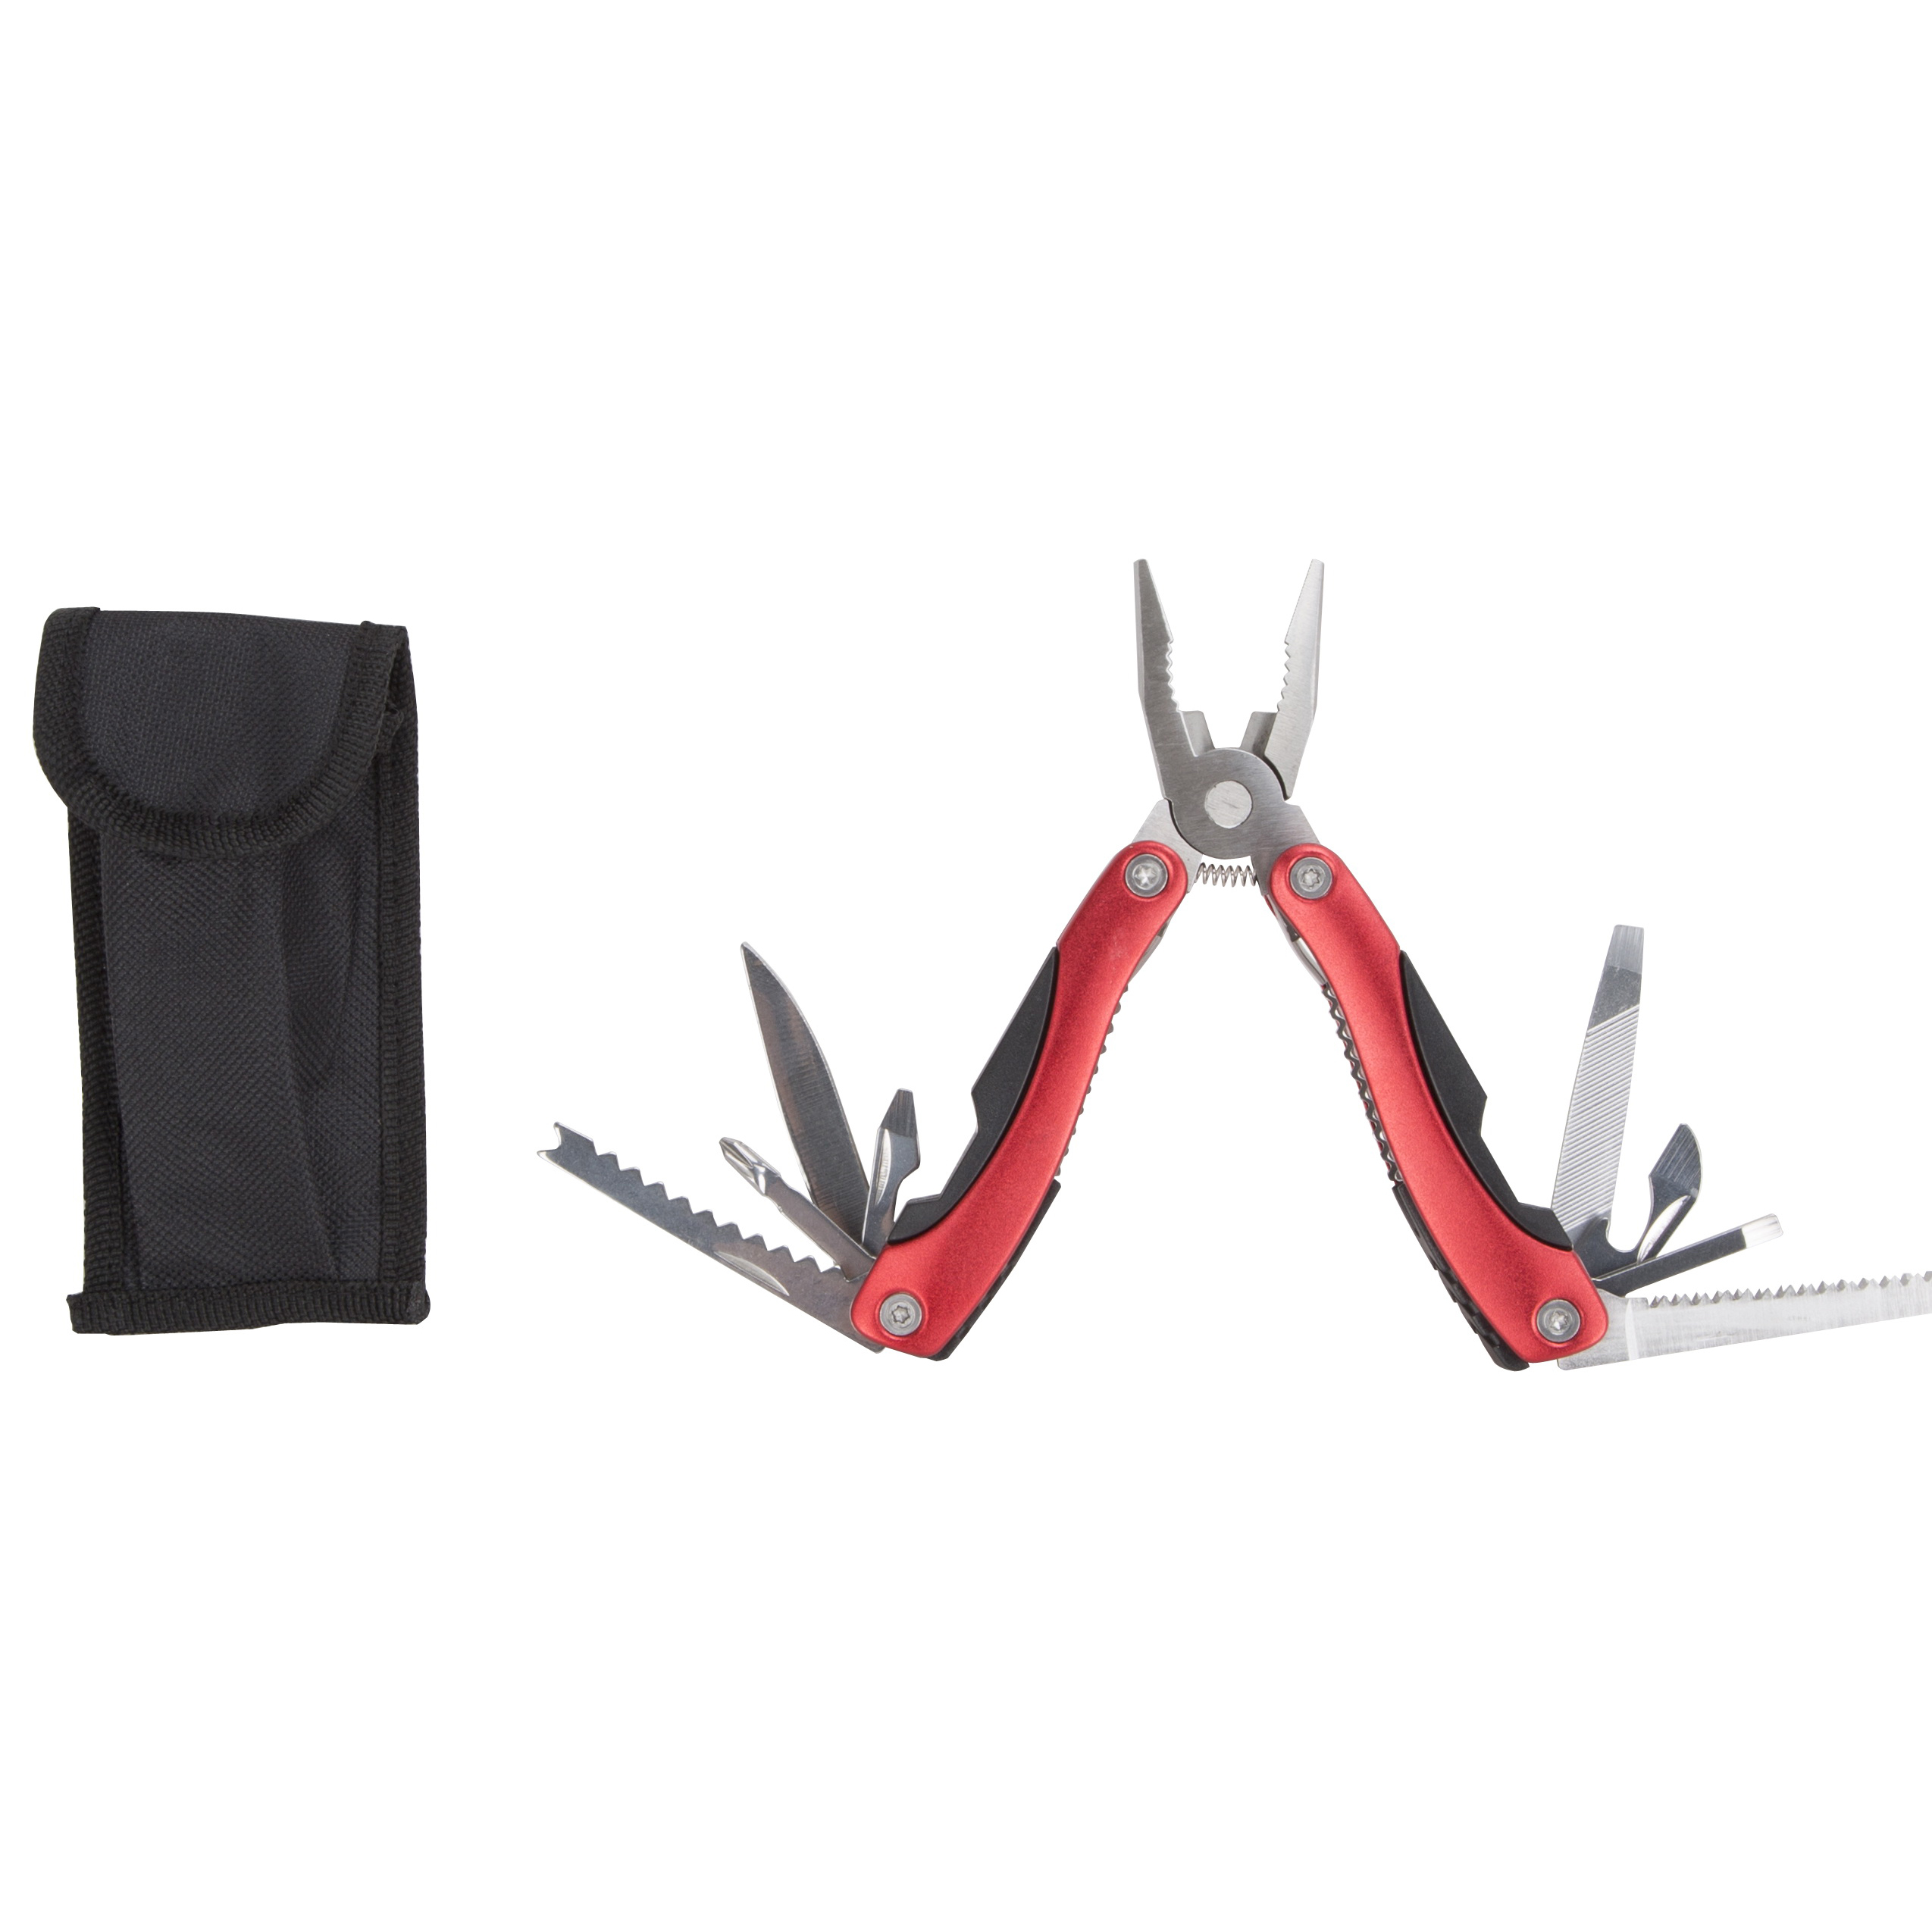 NT619 14-in-1 Multi-Tool, 14-Function, Foldable Handle